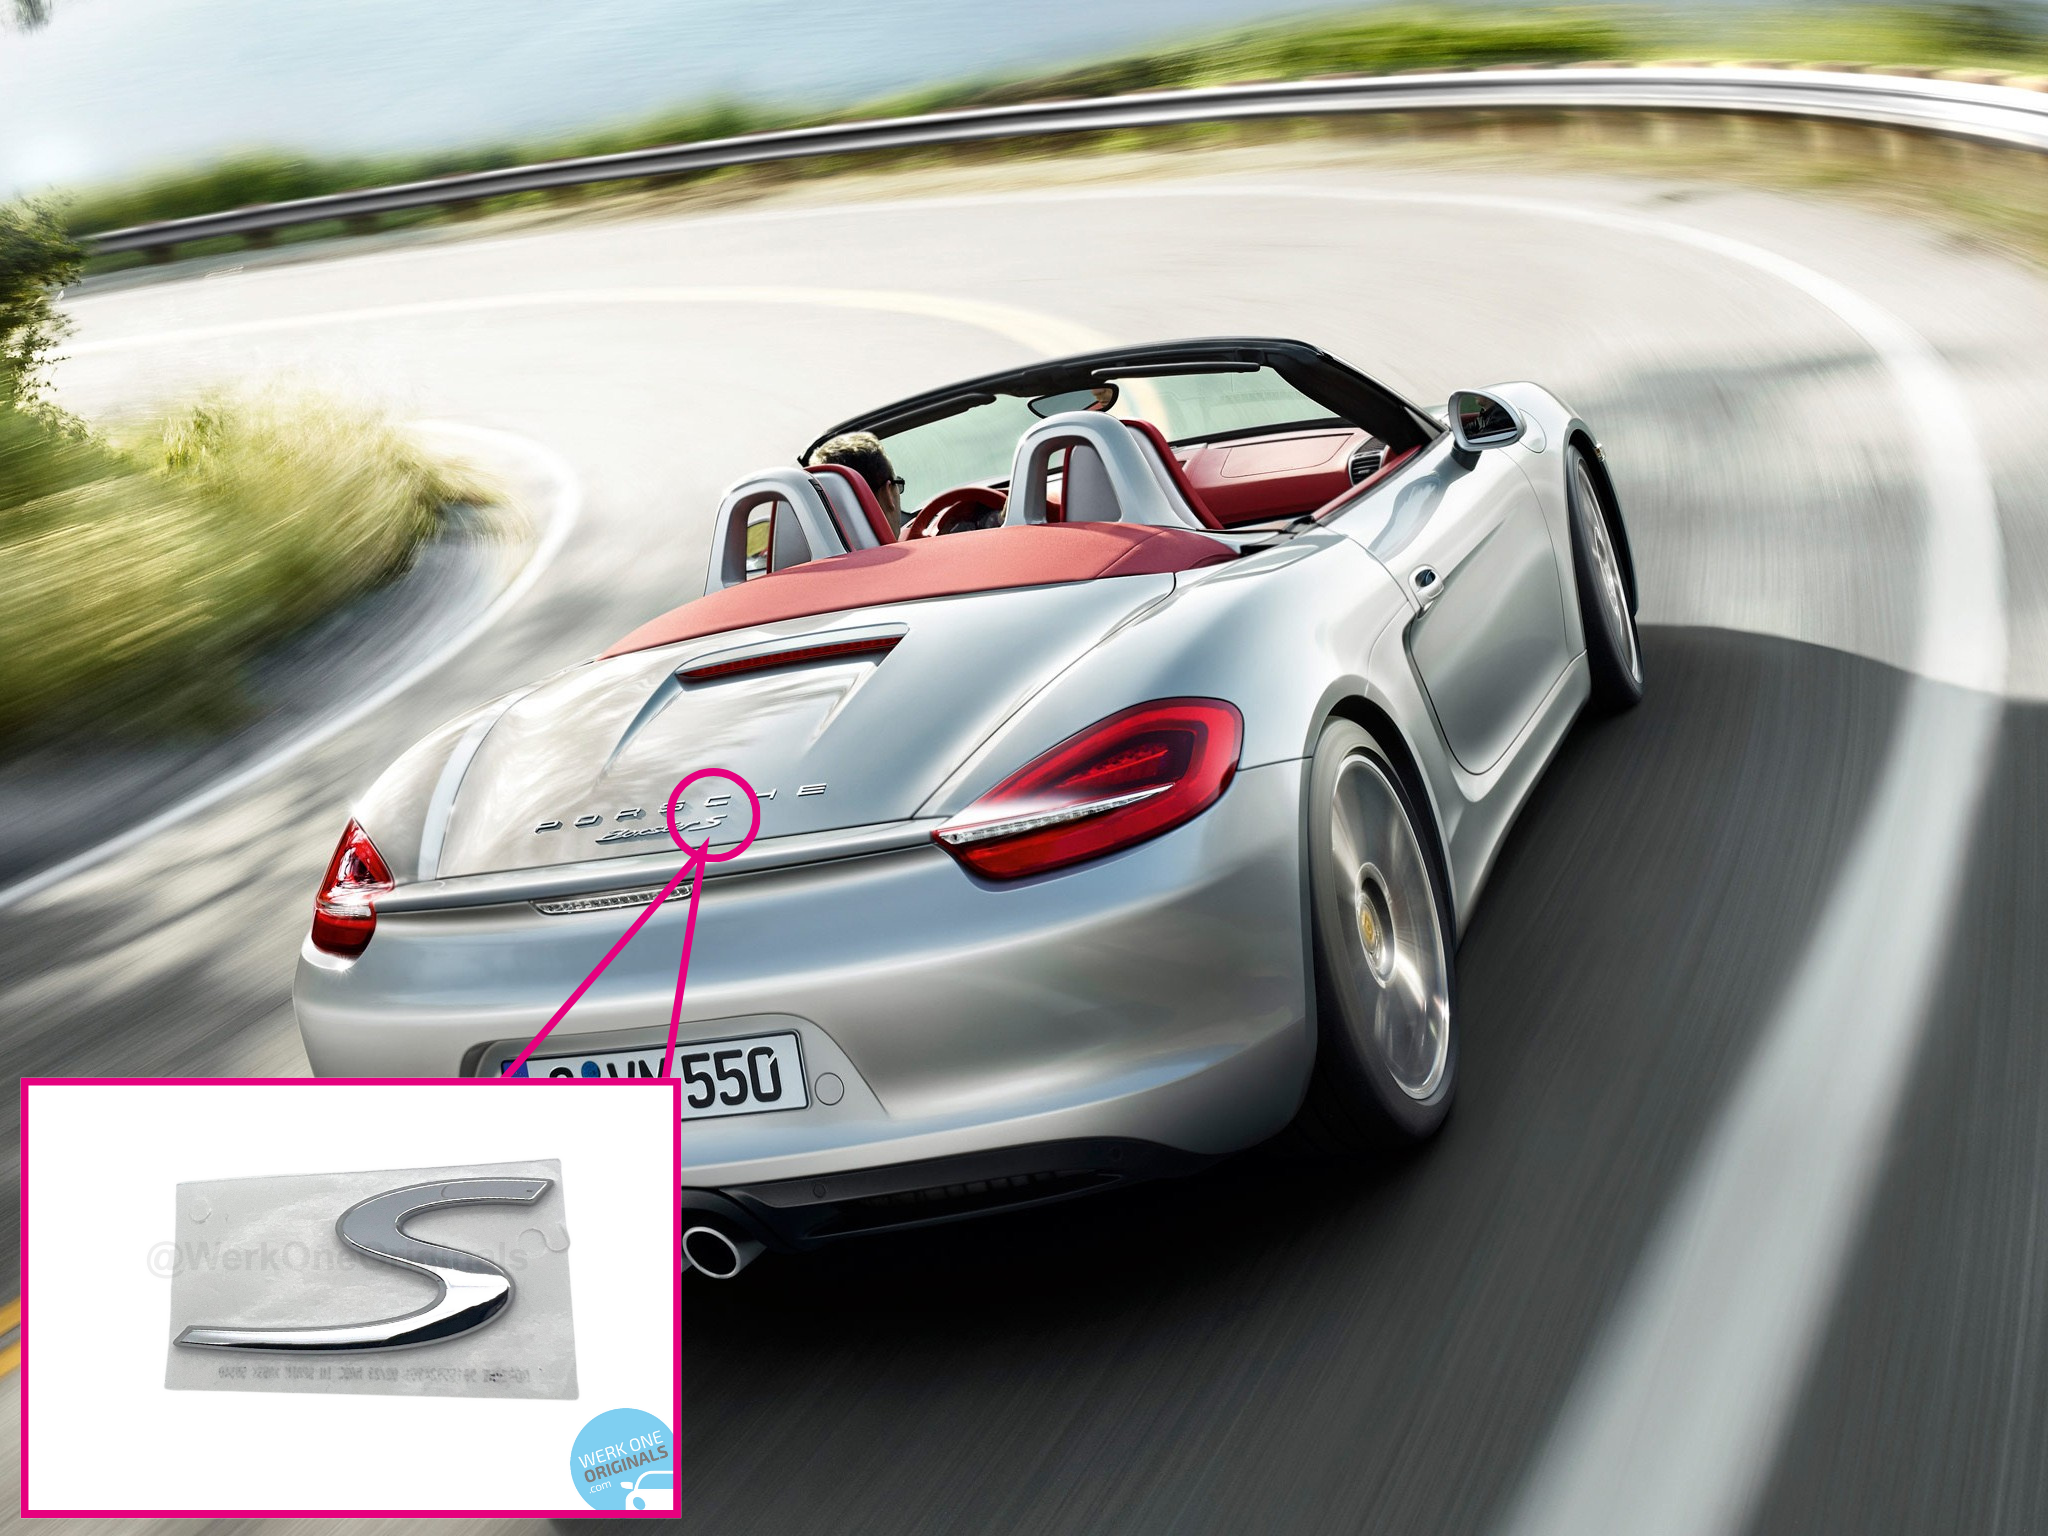 Porsche Official 'S' Rear Badge Decal in Chrome Silver for Boxster S Type 981 Models